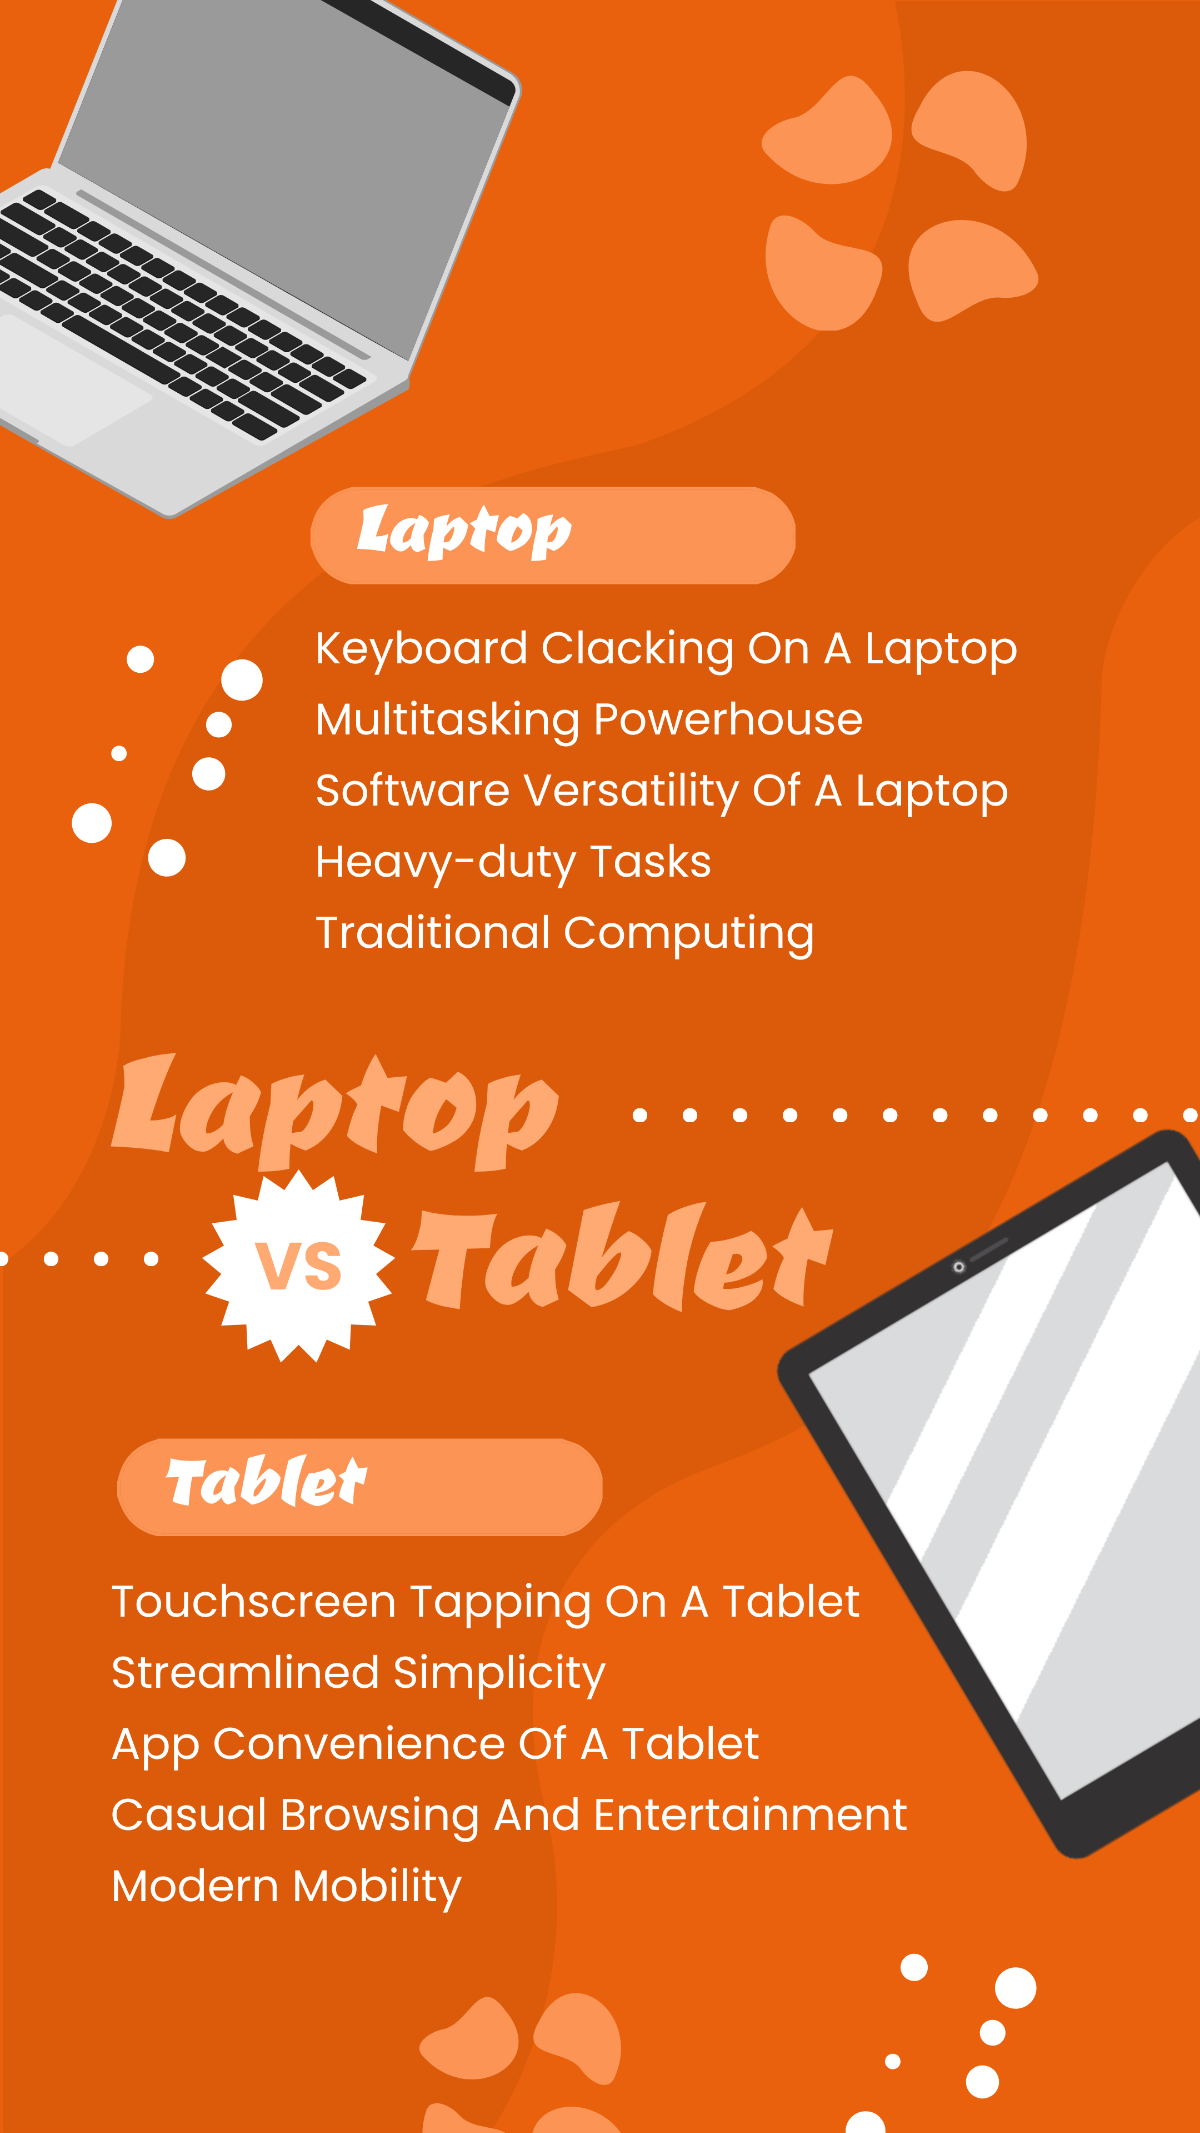 Free Laptop or Tablet This or That Story Template